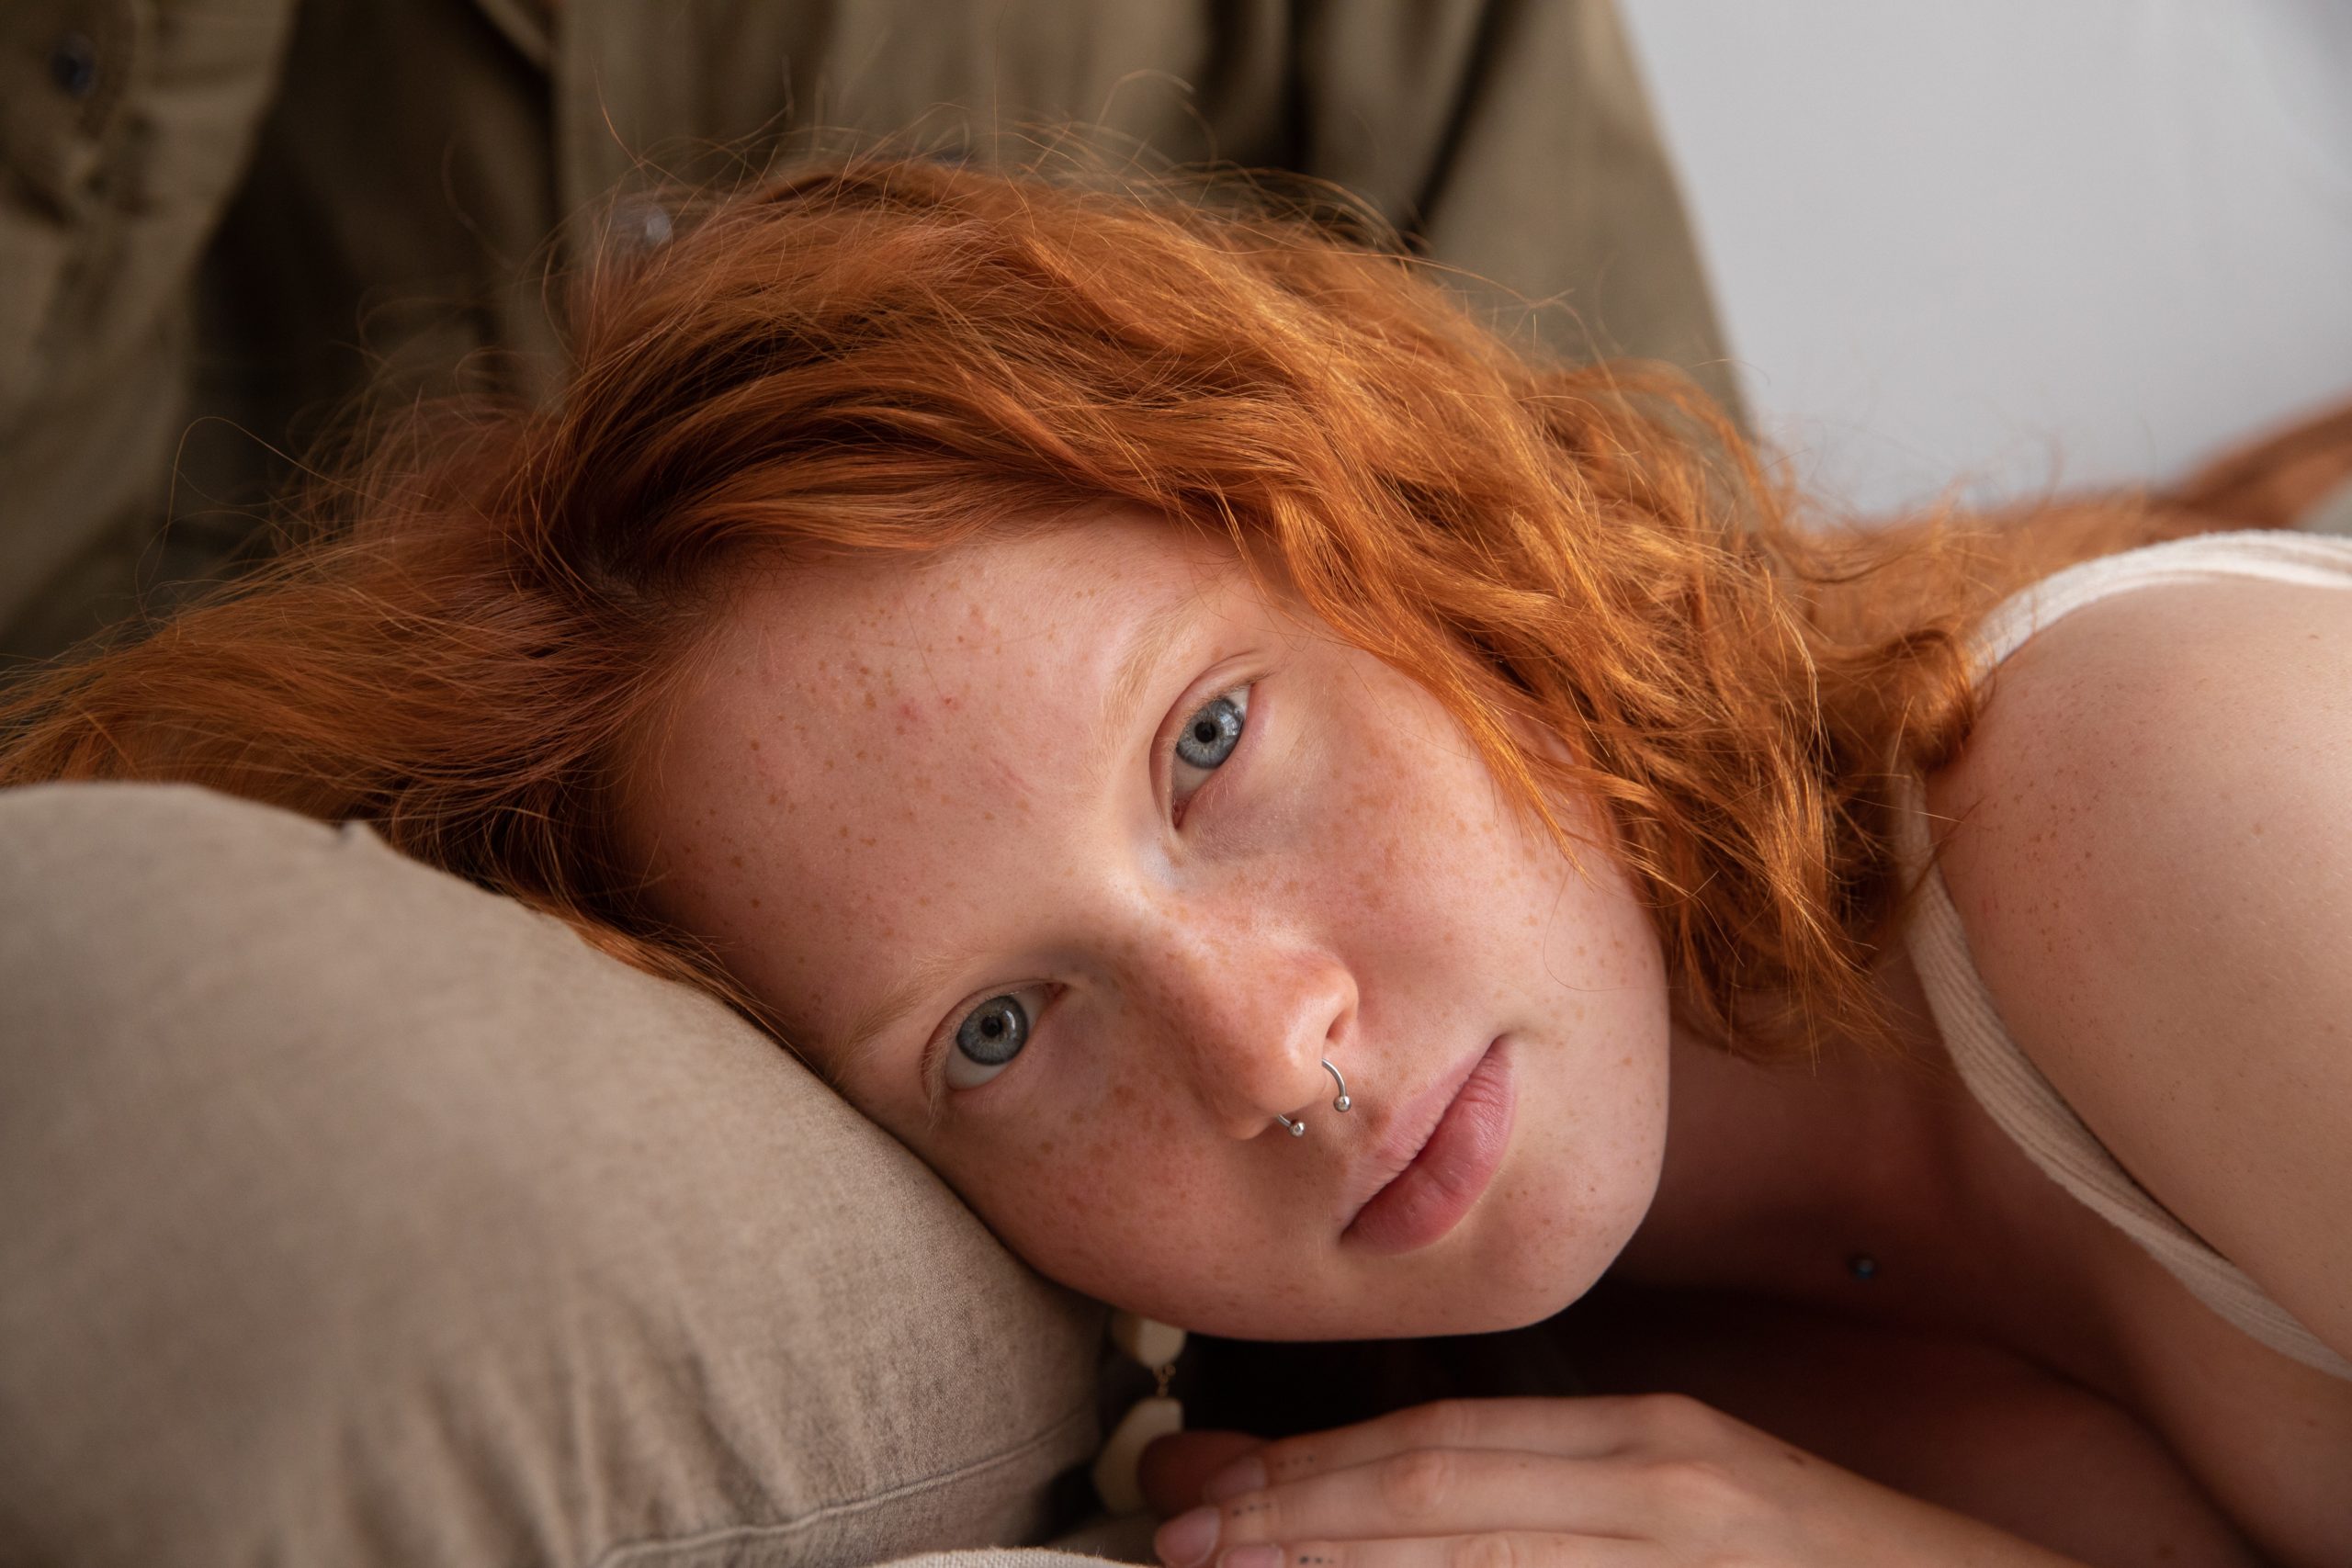 a redhead with septum piercings lying on someone’s lap